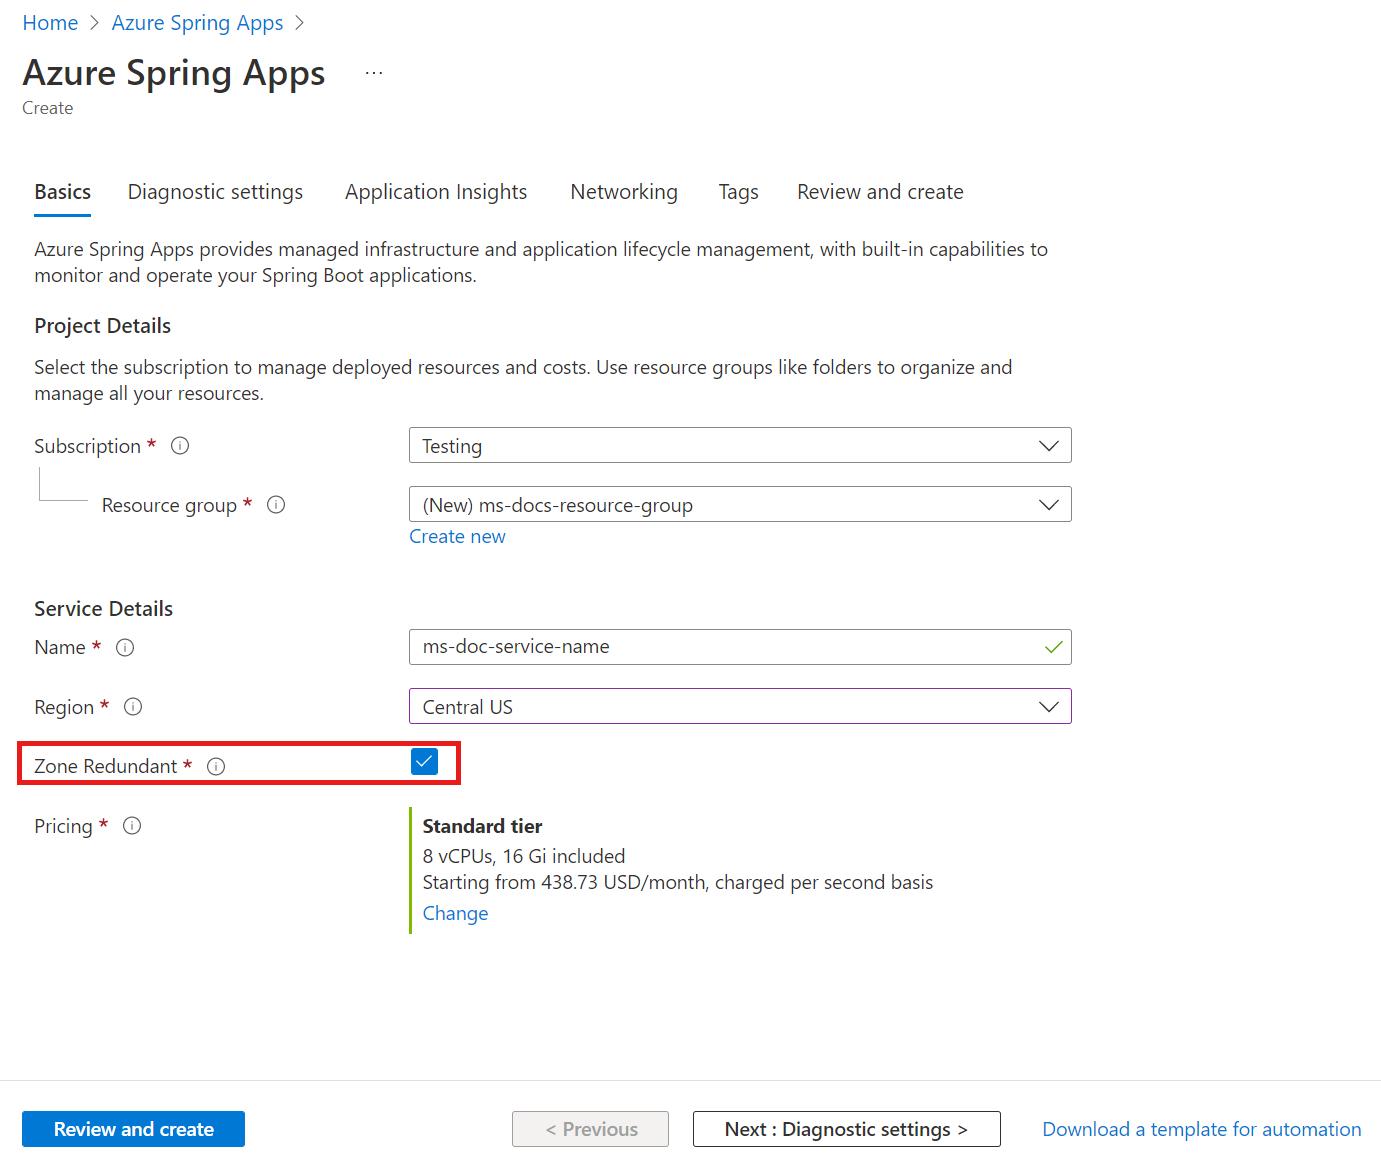 Screenshot of the Azure portal Create page showing the Zone Redundant option.